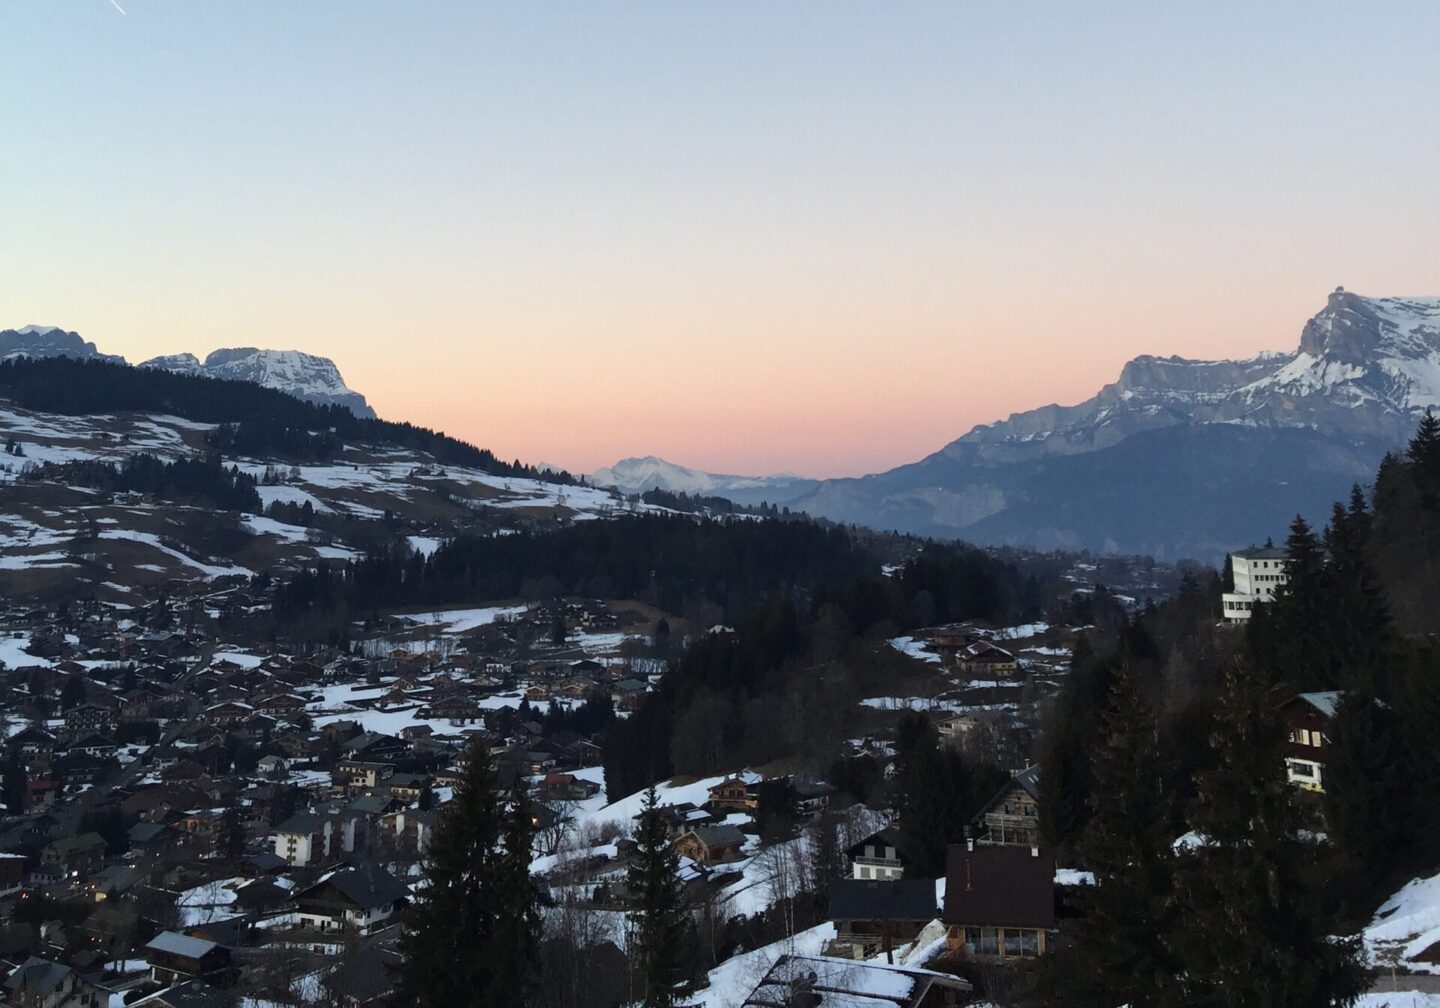 blue sky sunset over mountain town in valley covered in snow with mountains in Megève france